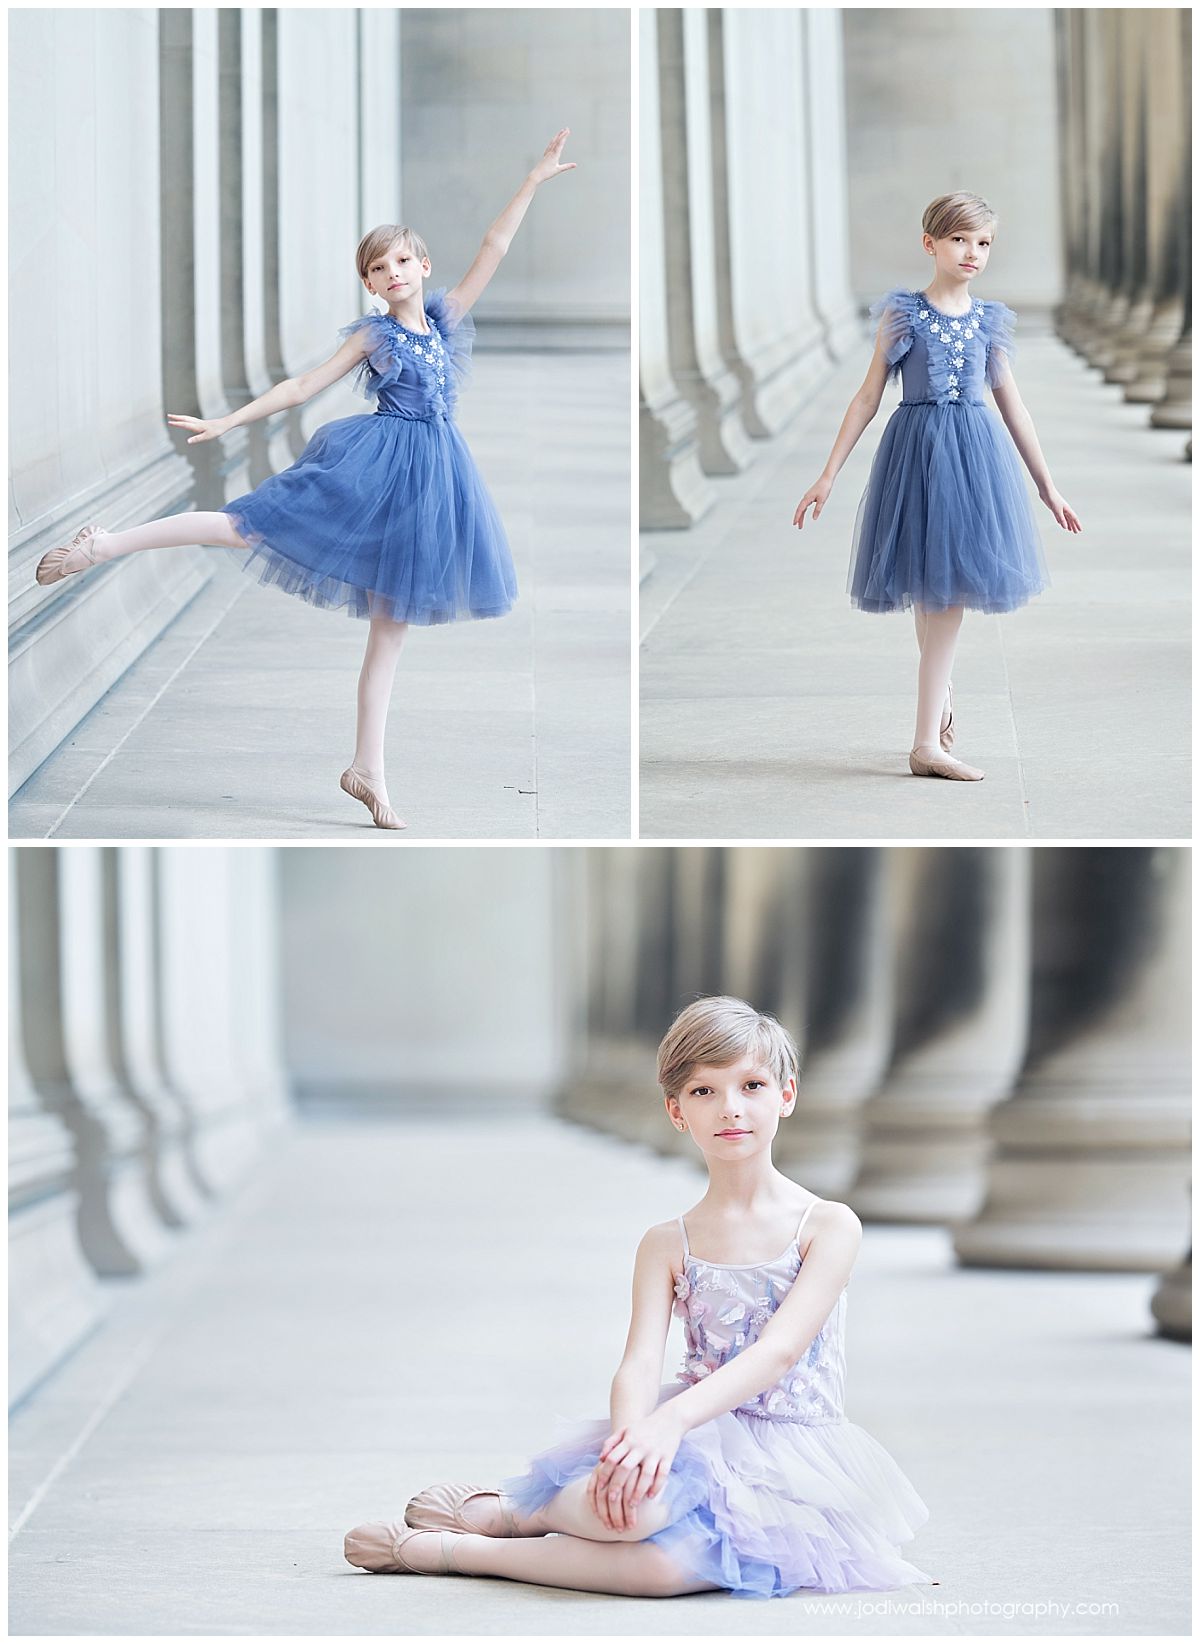 image of a young girl with short blonde hair, wearing a blue tulle dress in a long hallway with columns